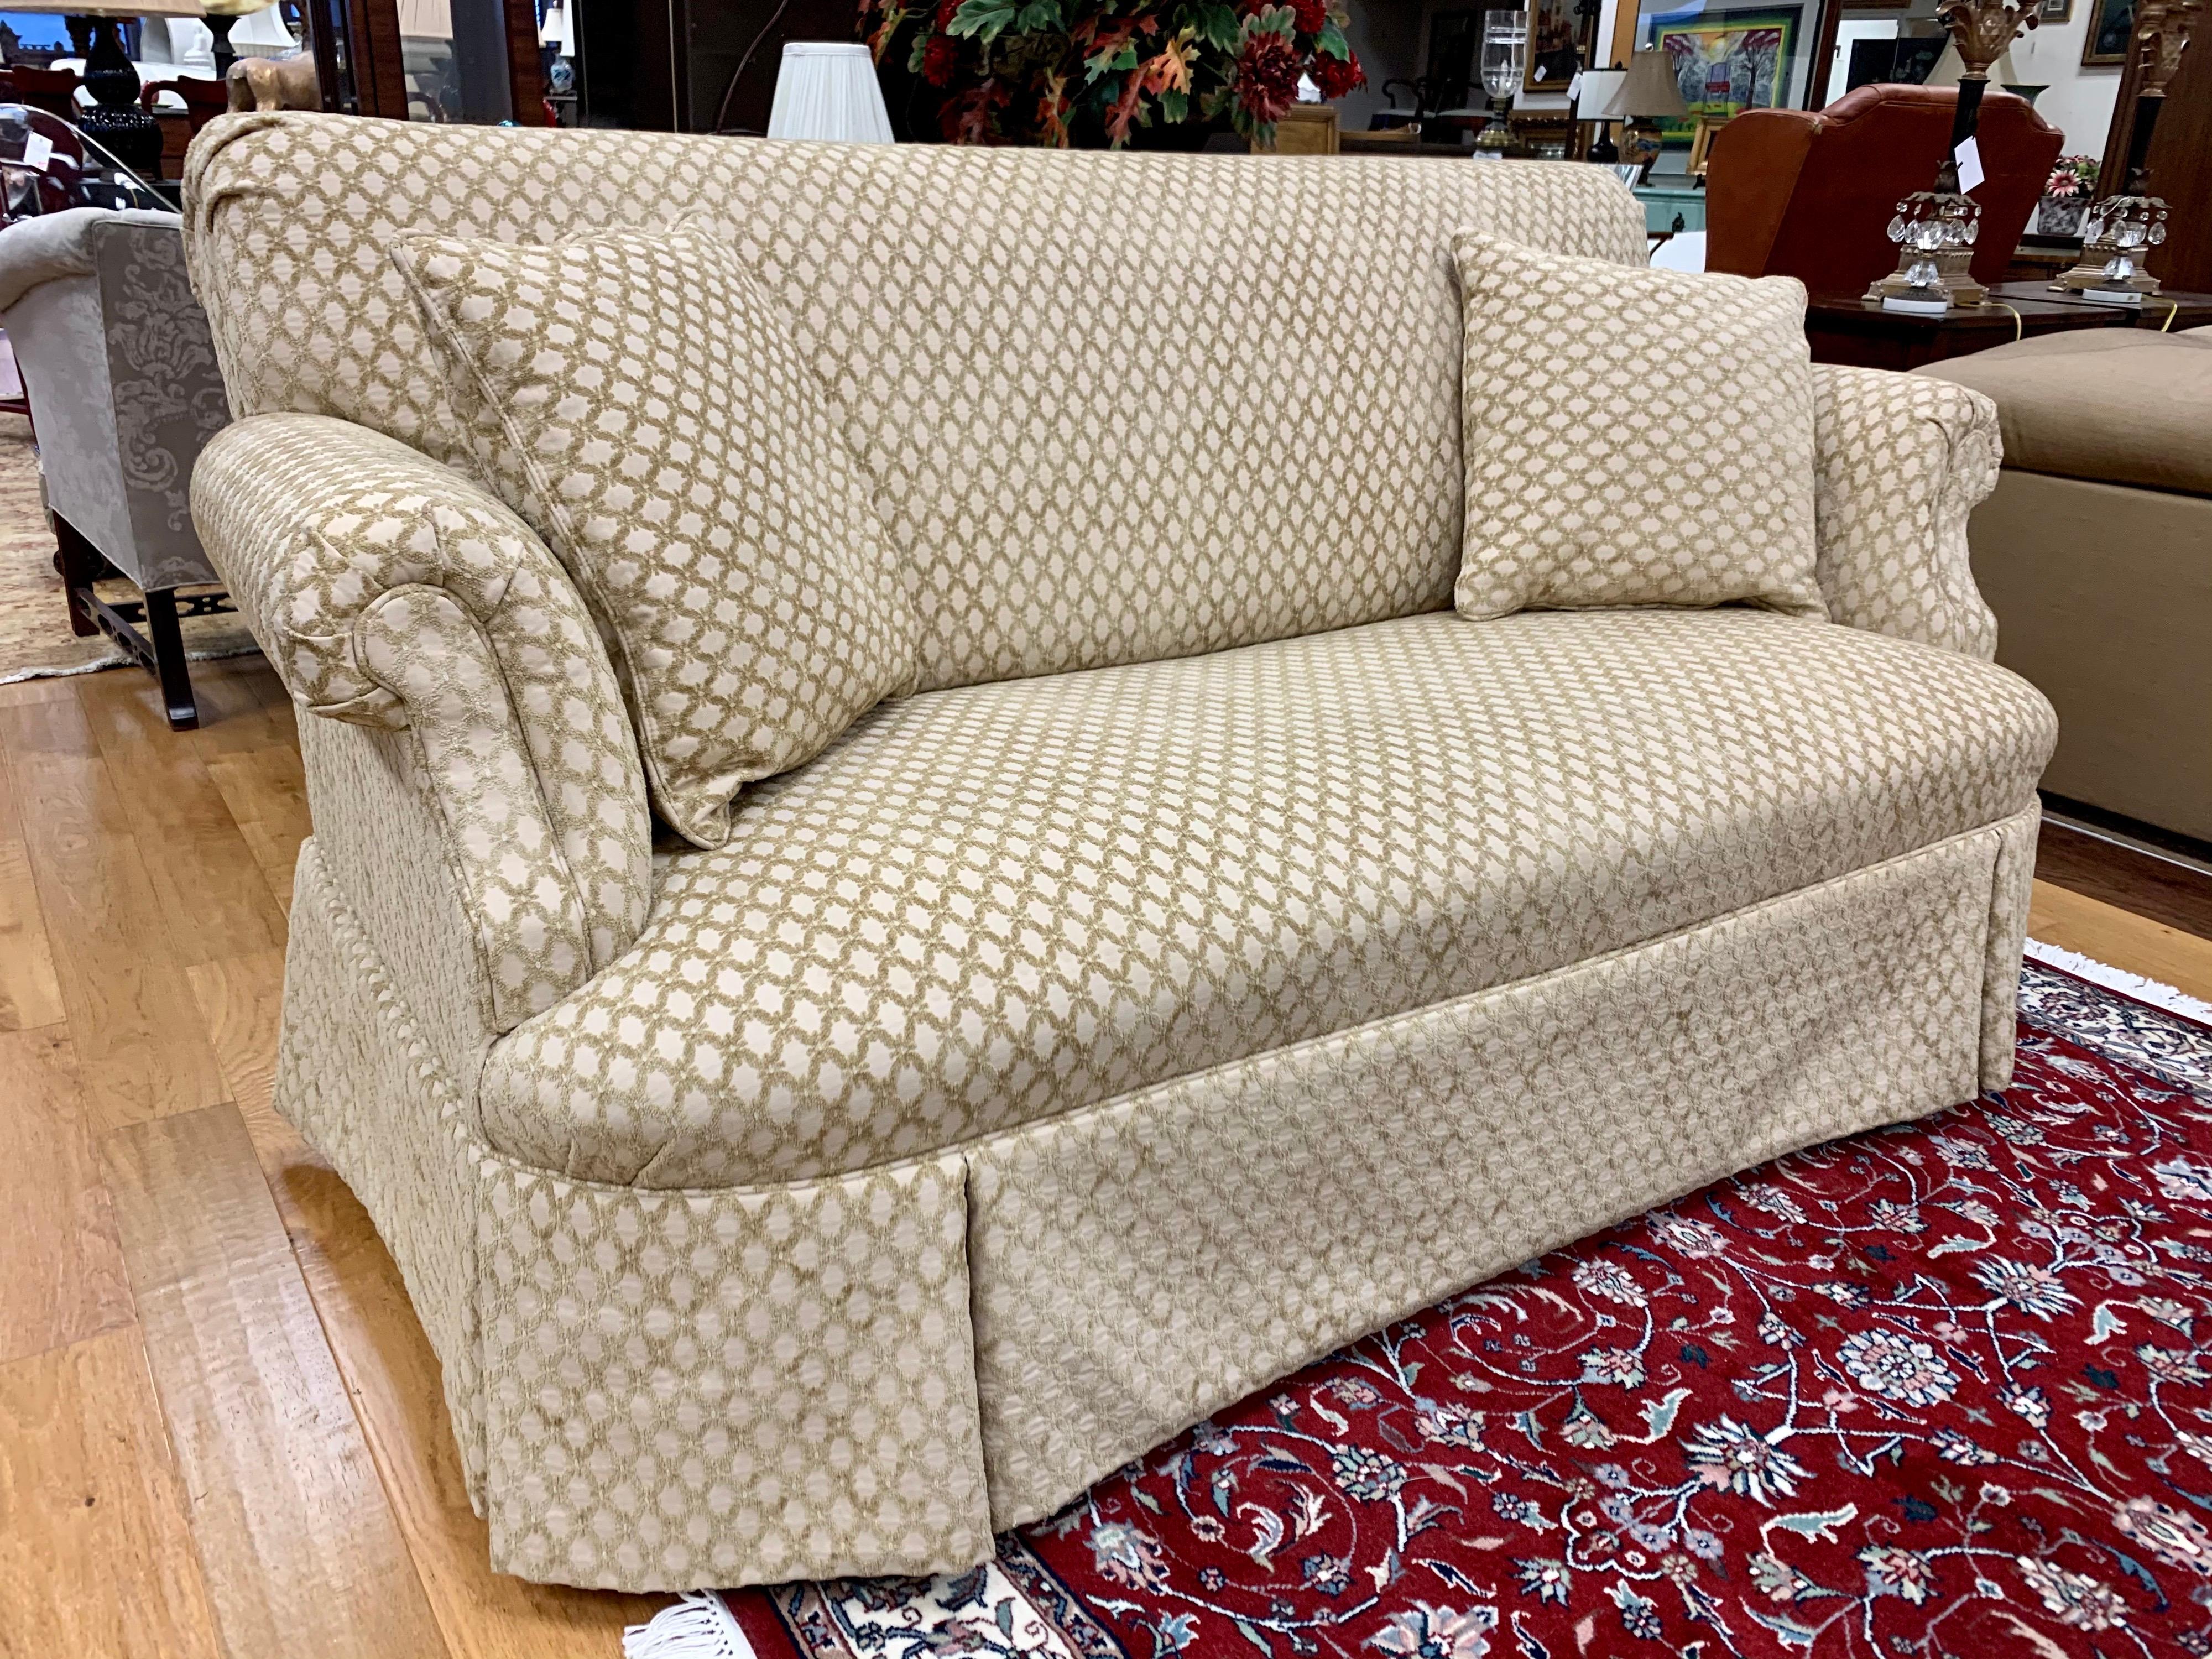 Stunning custom loveseat that measures six feet wide and has a luxurious Kravet fabric
featuring a regal raised trellis pattern. All dimensions are below. Now, more than ever, home is where the heart is.